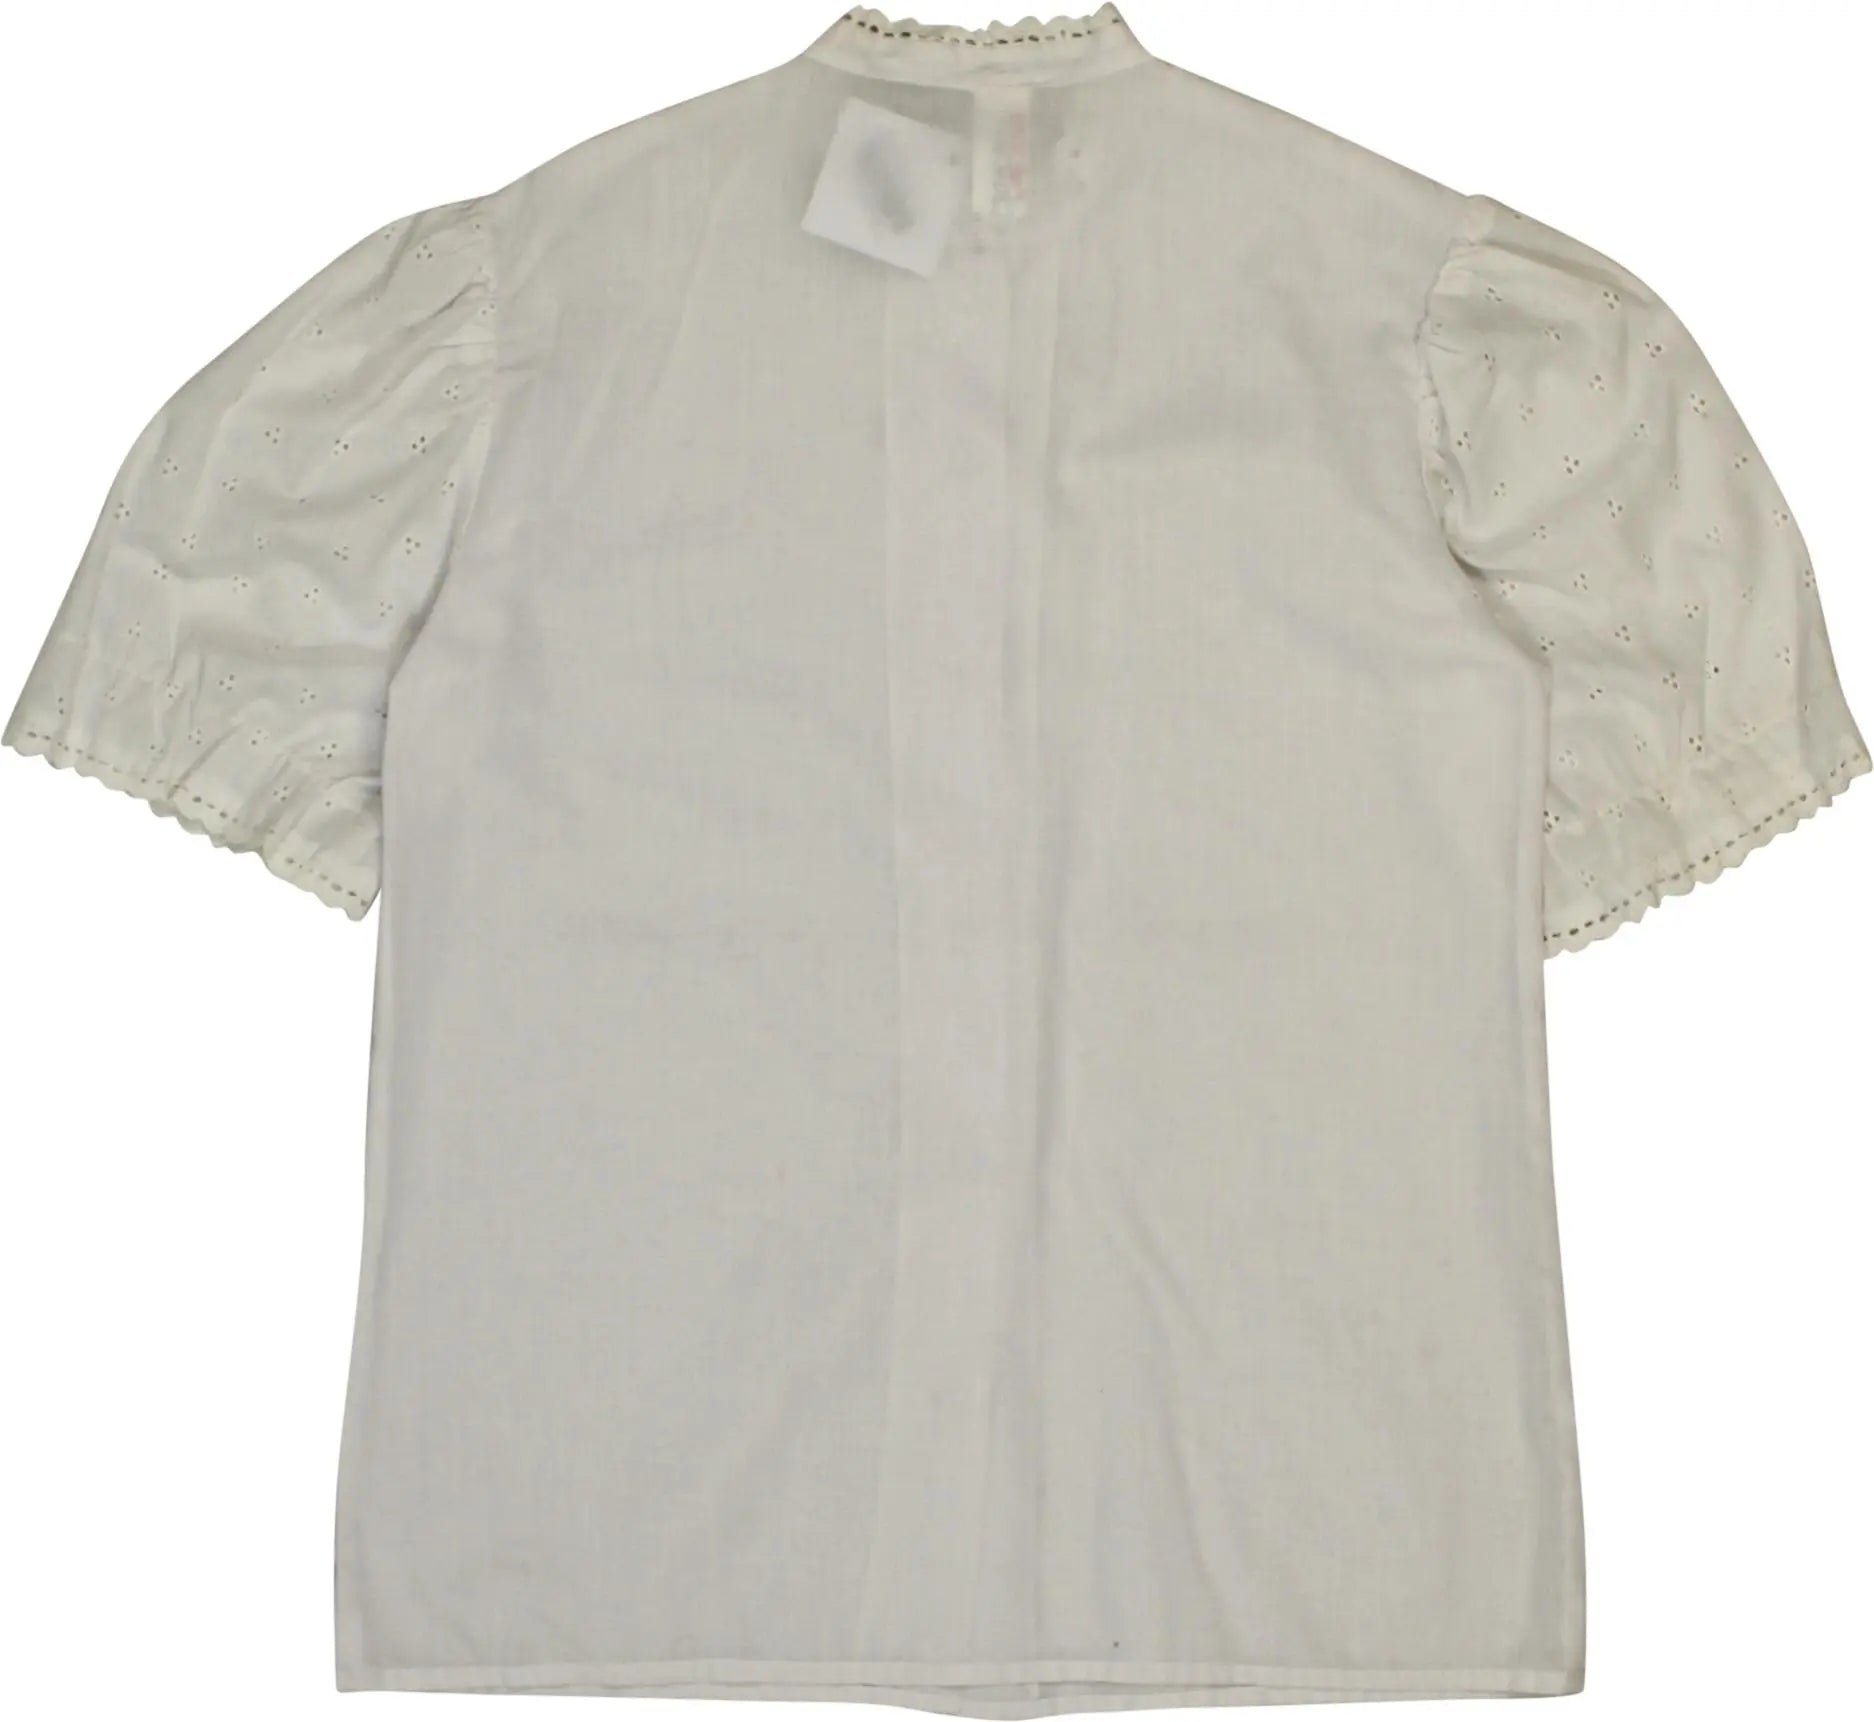 Handmade - Handmade Lace Shirt- ThriftTale.com - Vintage and second handclothing